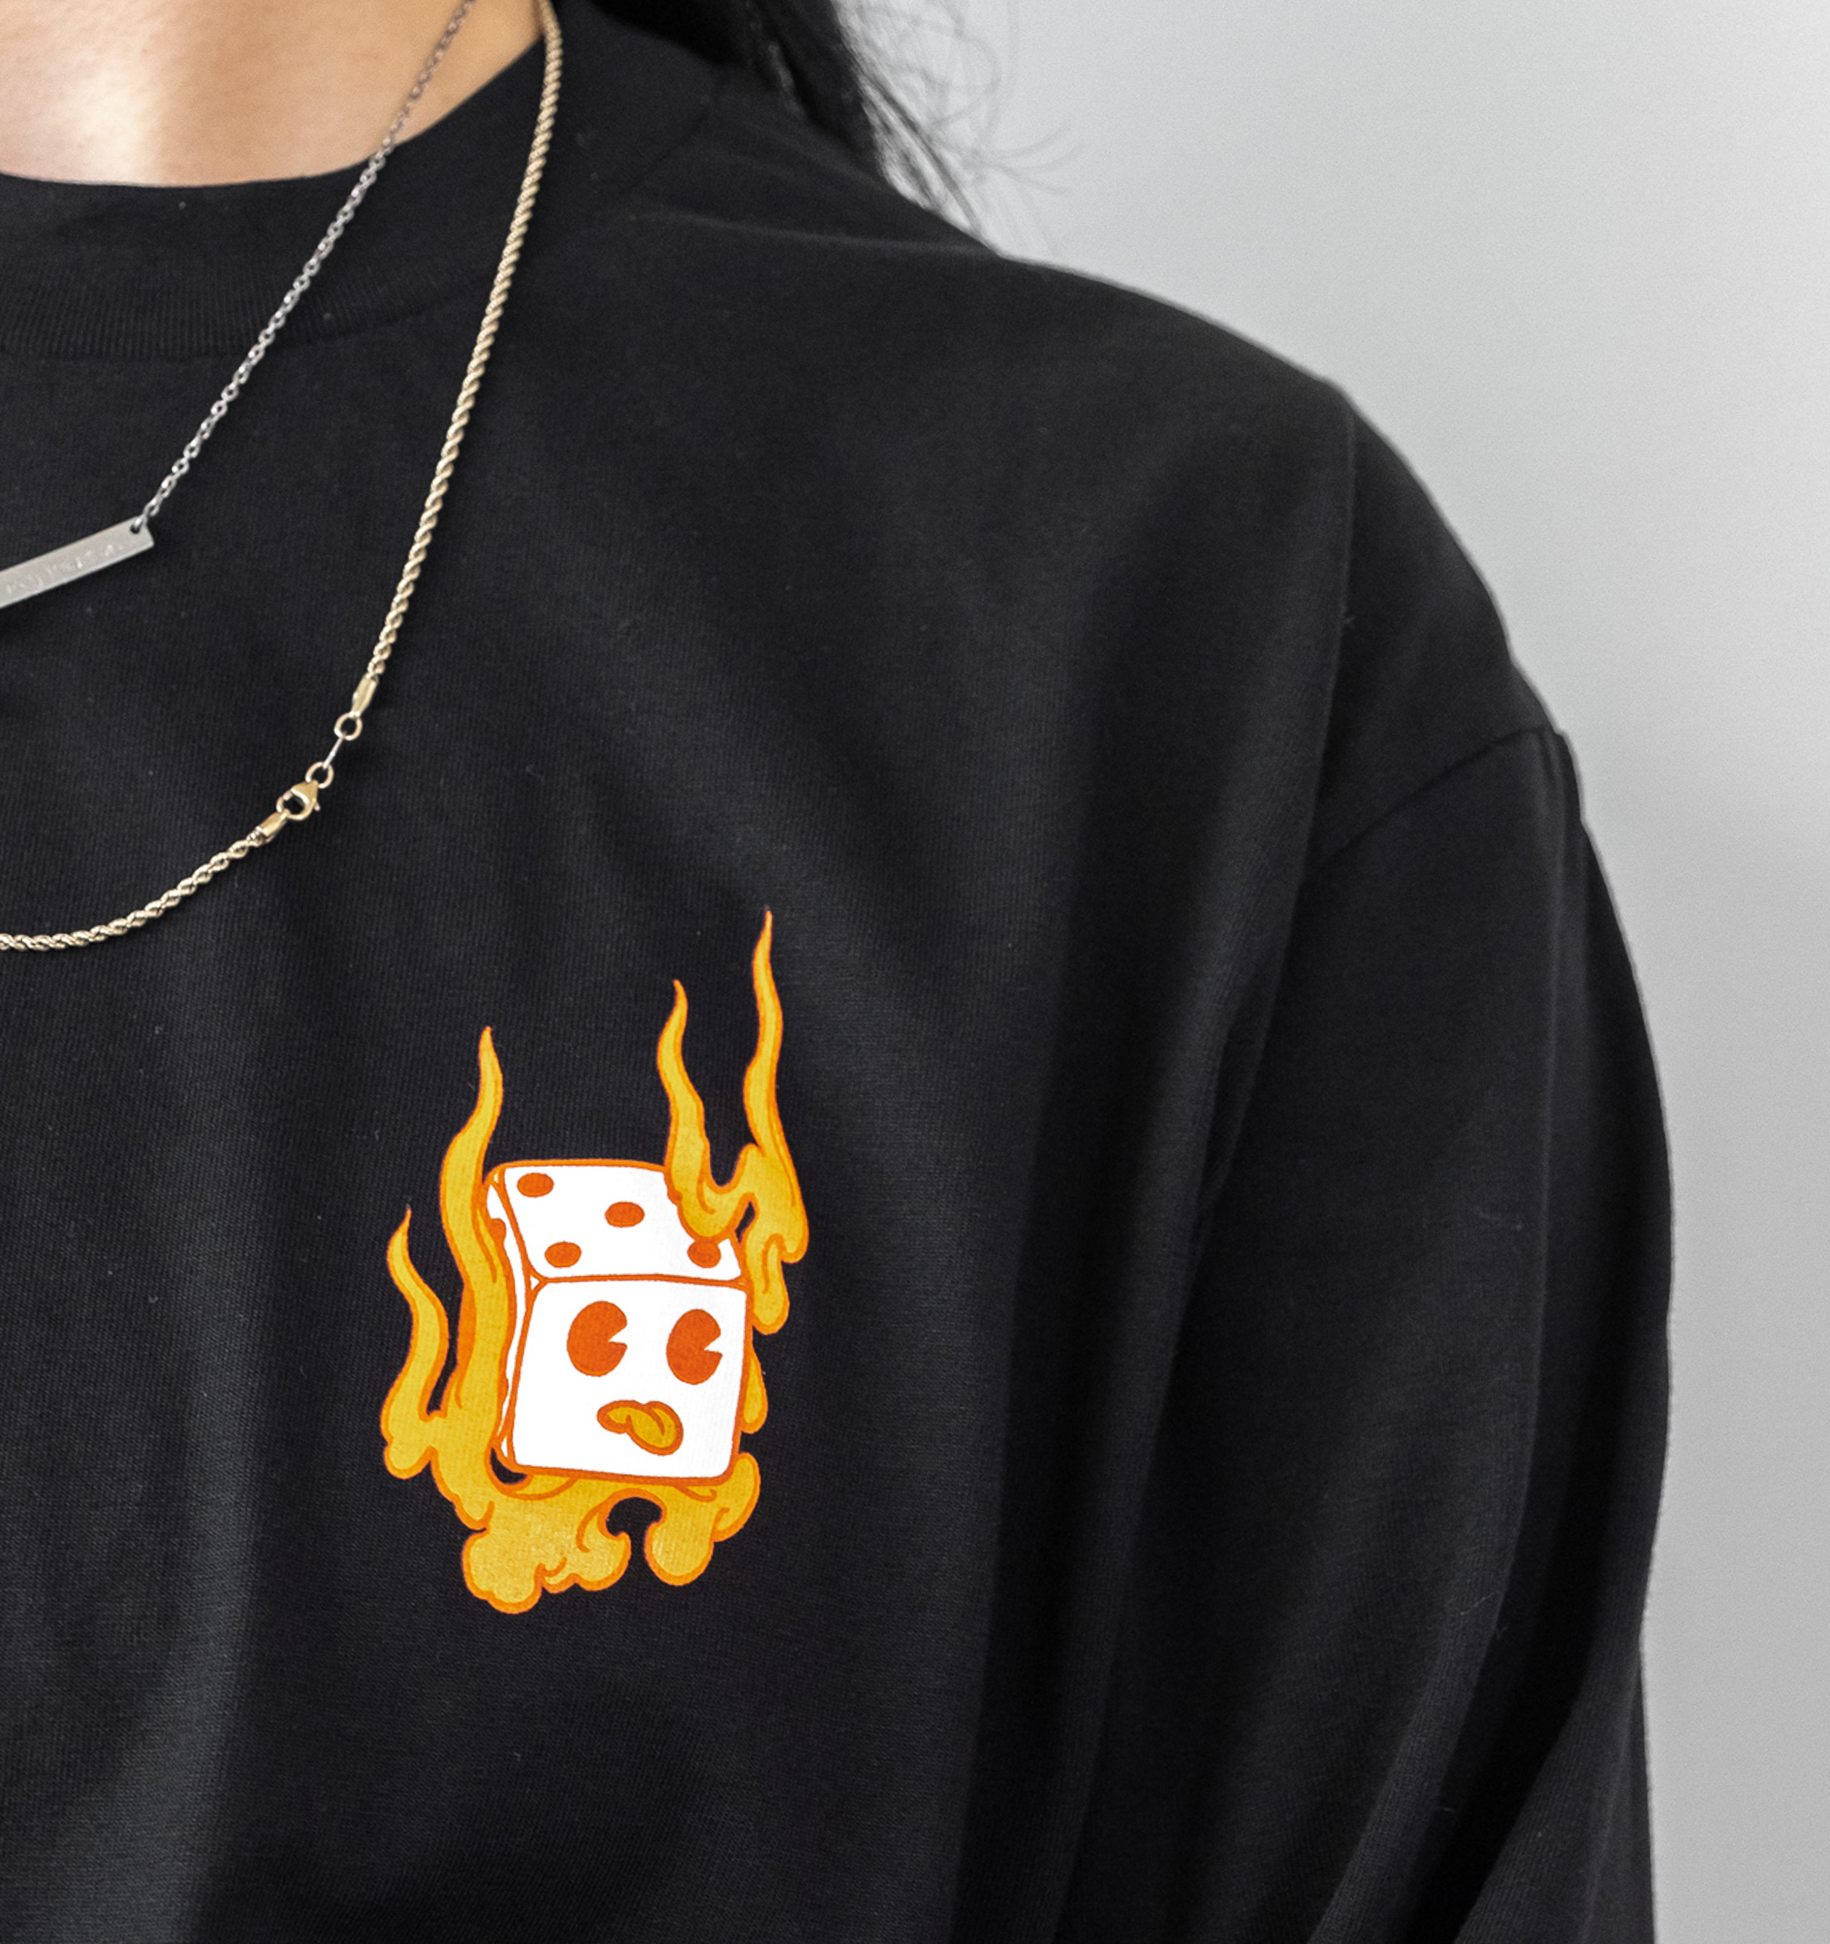 Dice Flames Long Sleeve (Holders Exclusive)